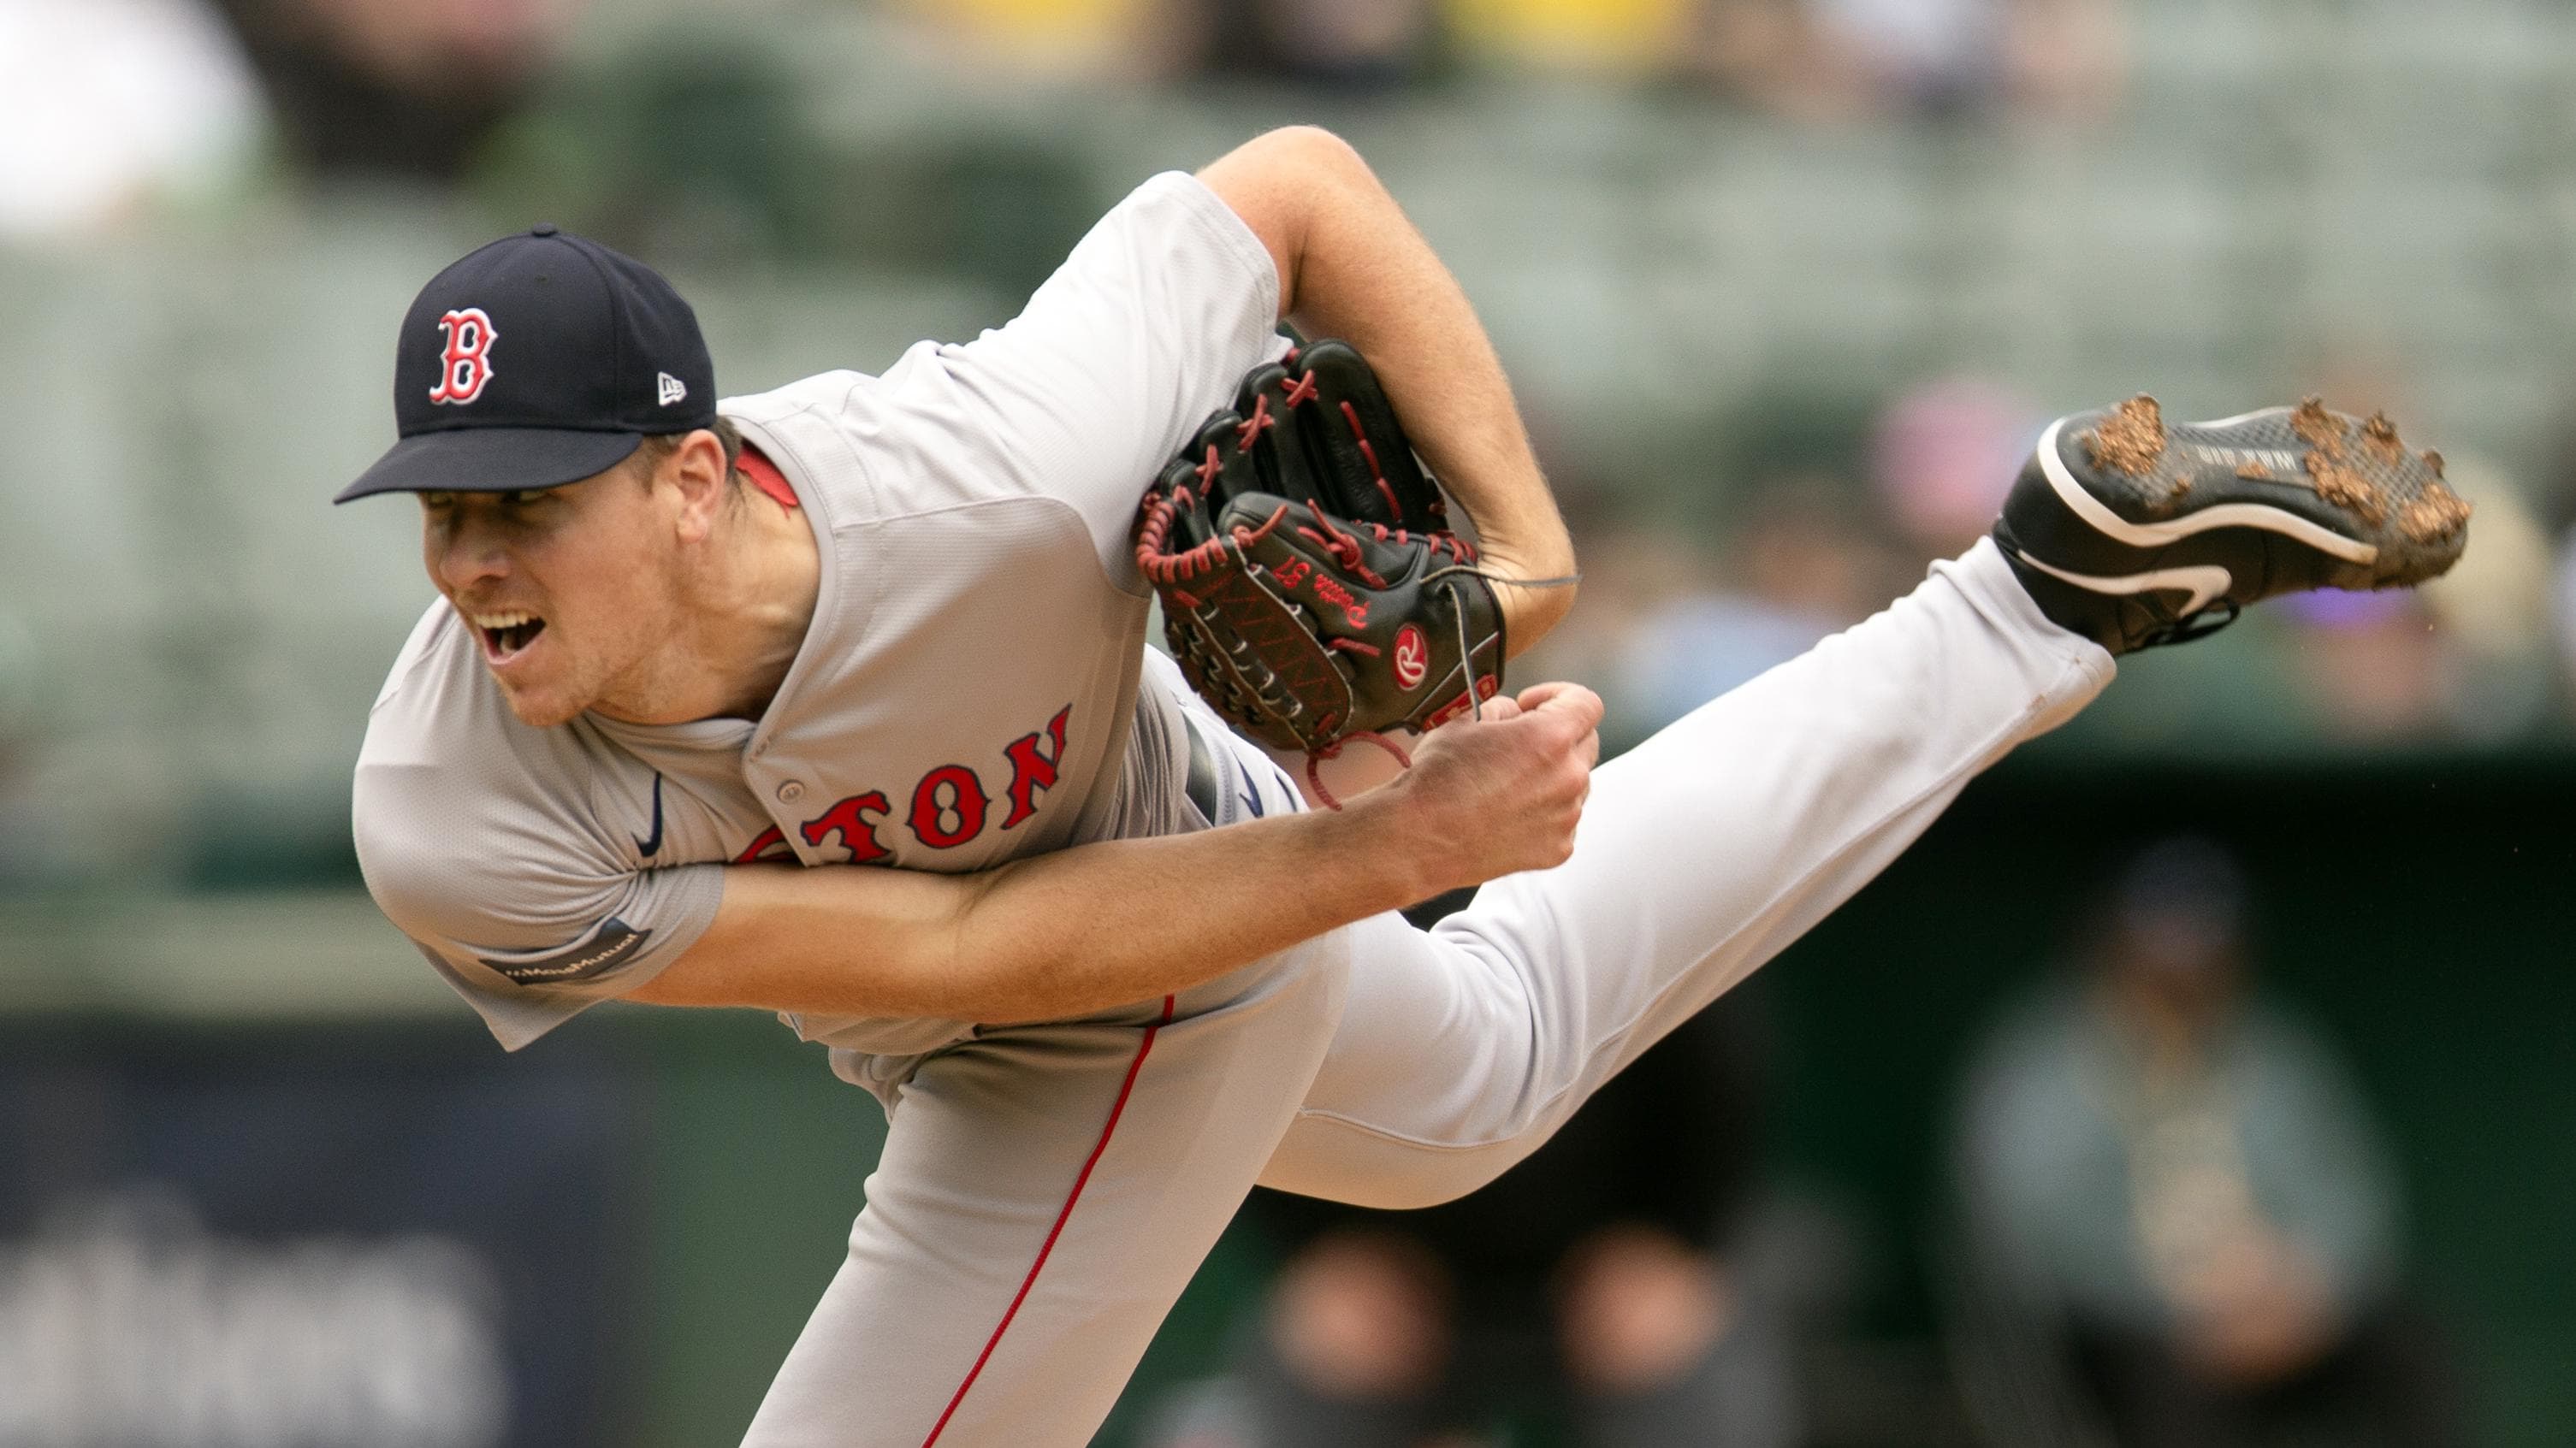 Boston Red Sox' Key Hurler Makes Uneven Rehab Start as He Works His Way Back From Injury